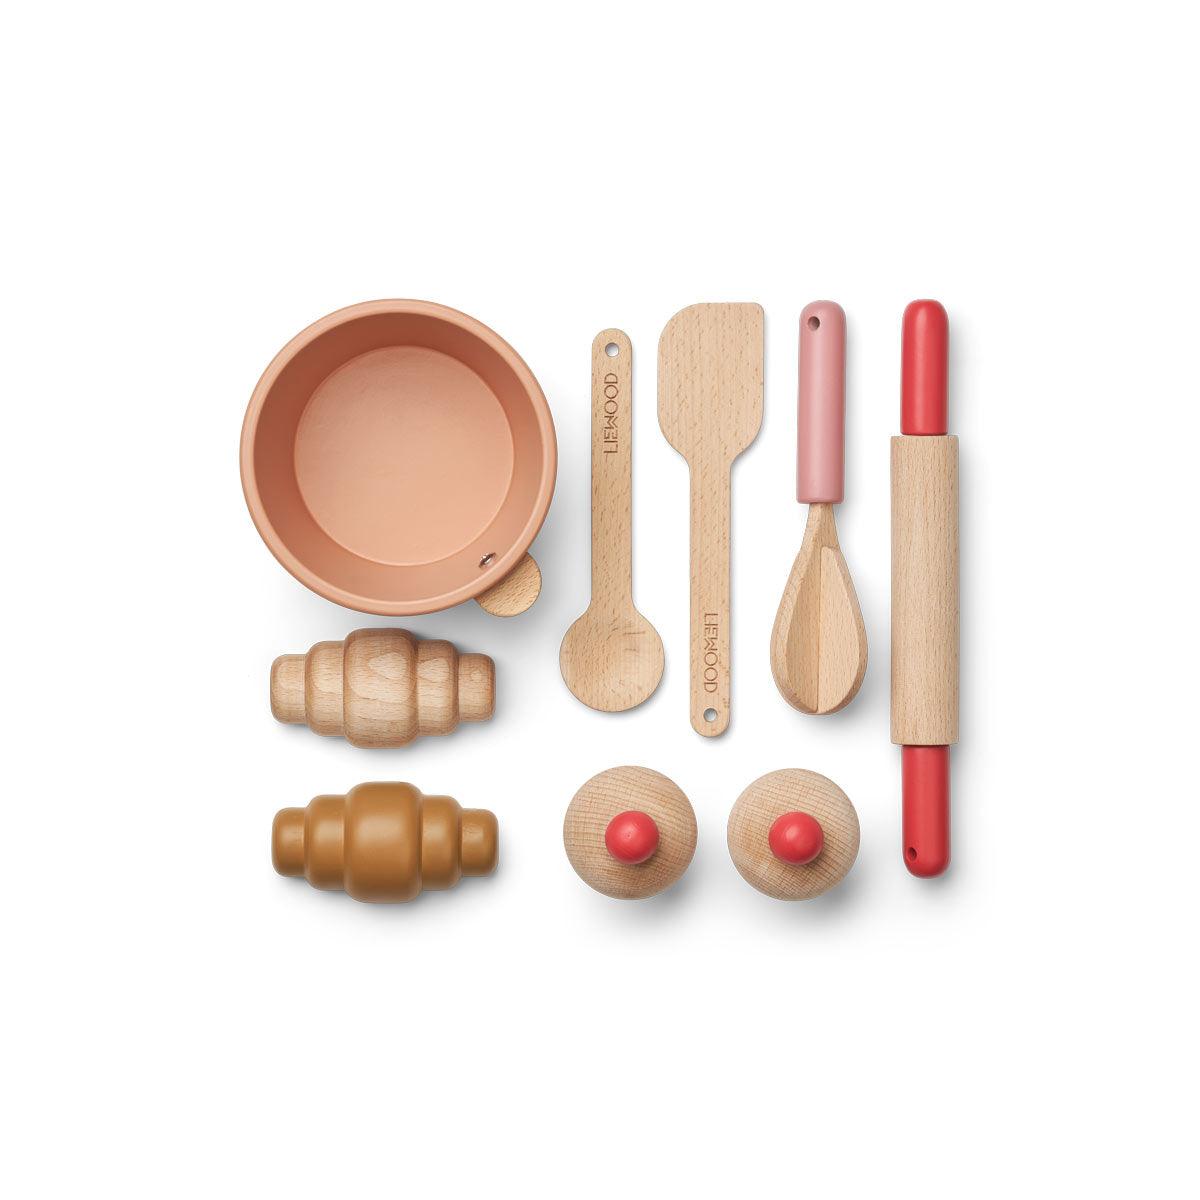 Load image into Gallery viewer, The Liewood Lisbeth Baking Play Set is a great role play christmas gift for your little ones to use their imagination stocked at Nottingham’s Children’s Independent Store.
